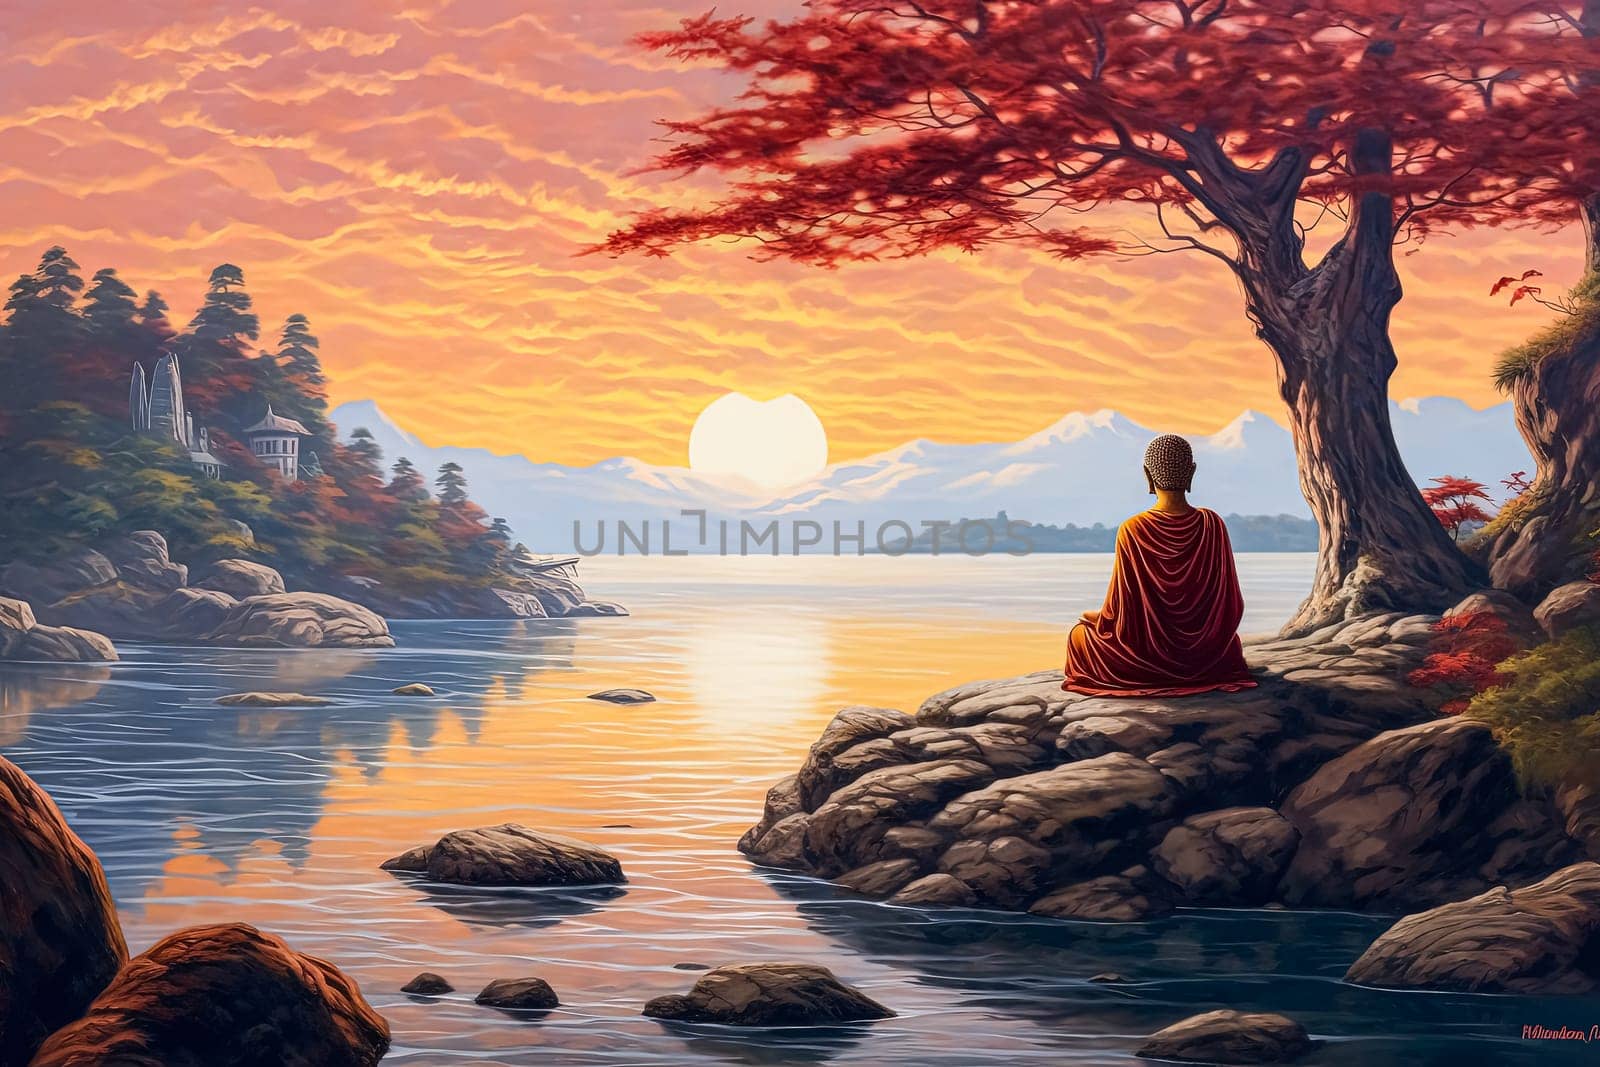 A man sits on a rock overlooking a body of water. The scene is serene and peaceful, with the man in a lotus position and the water reflecting the mountains in the background